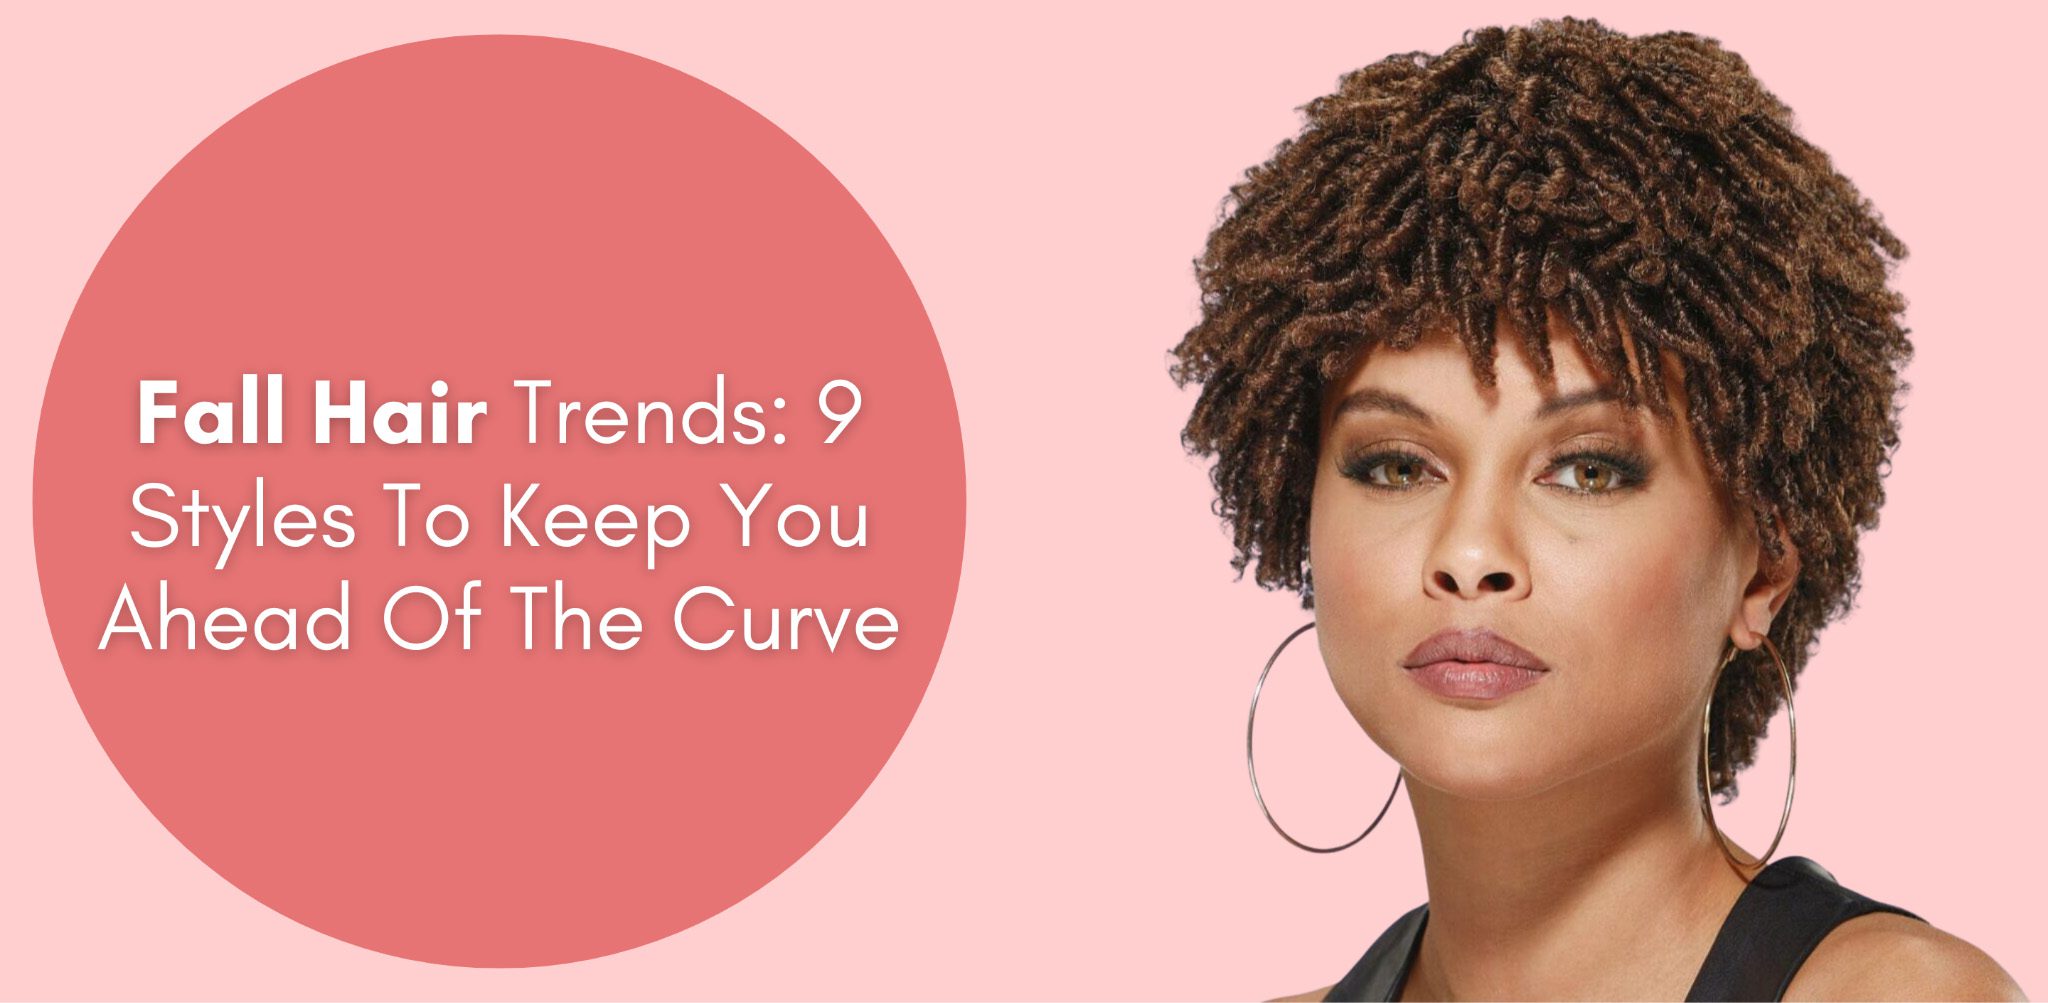 Fall Hair Trends 9 Styles To Keep You Ahead Of The Curve Especially